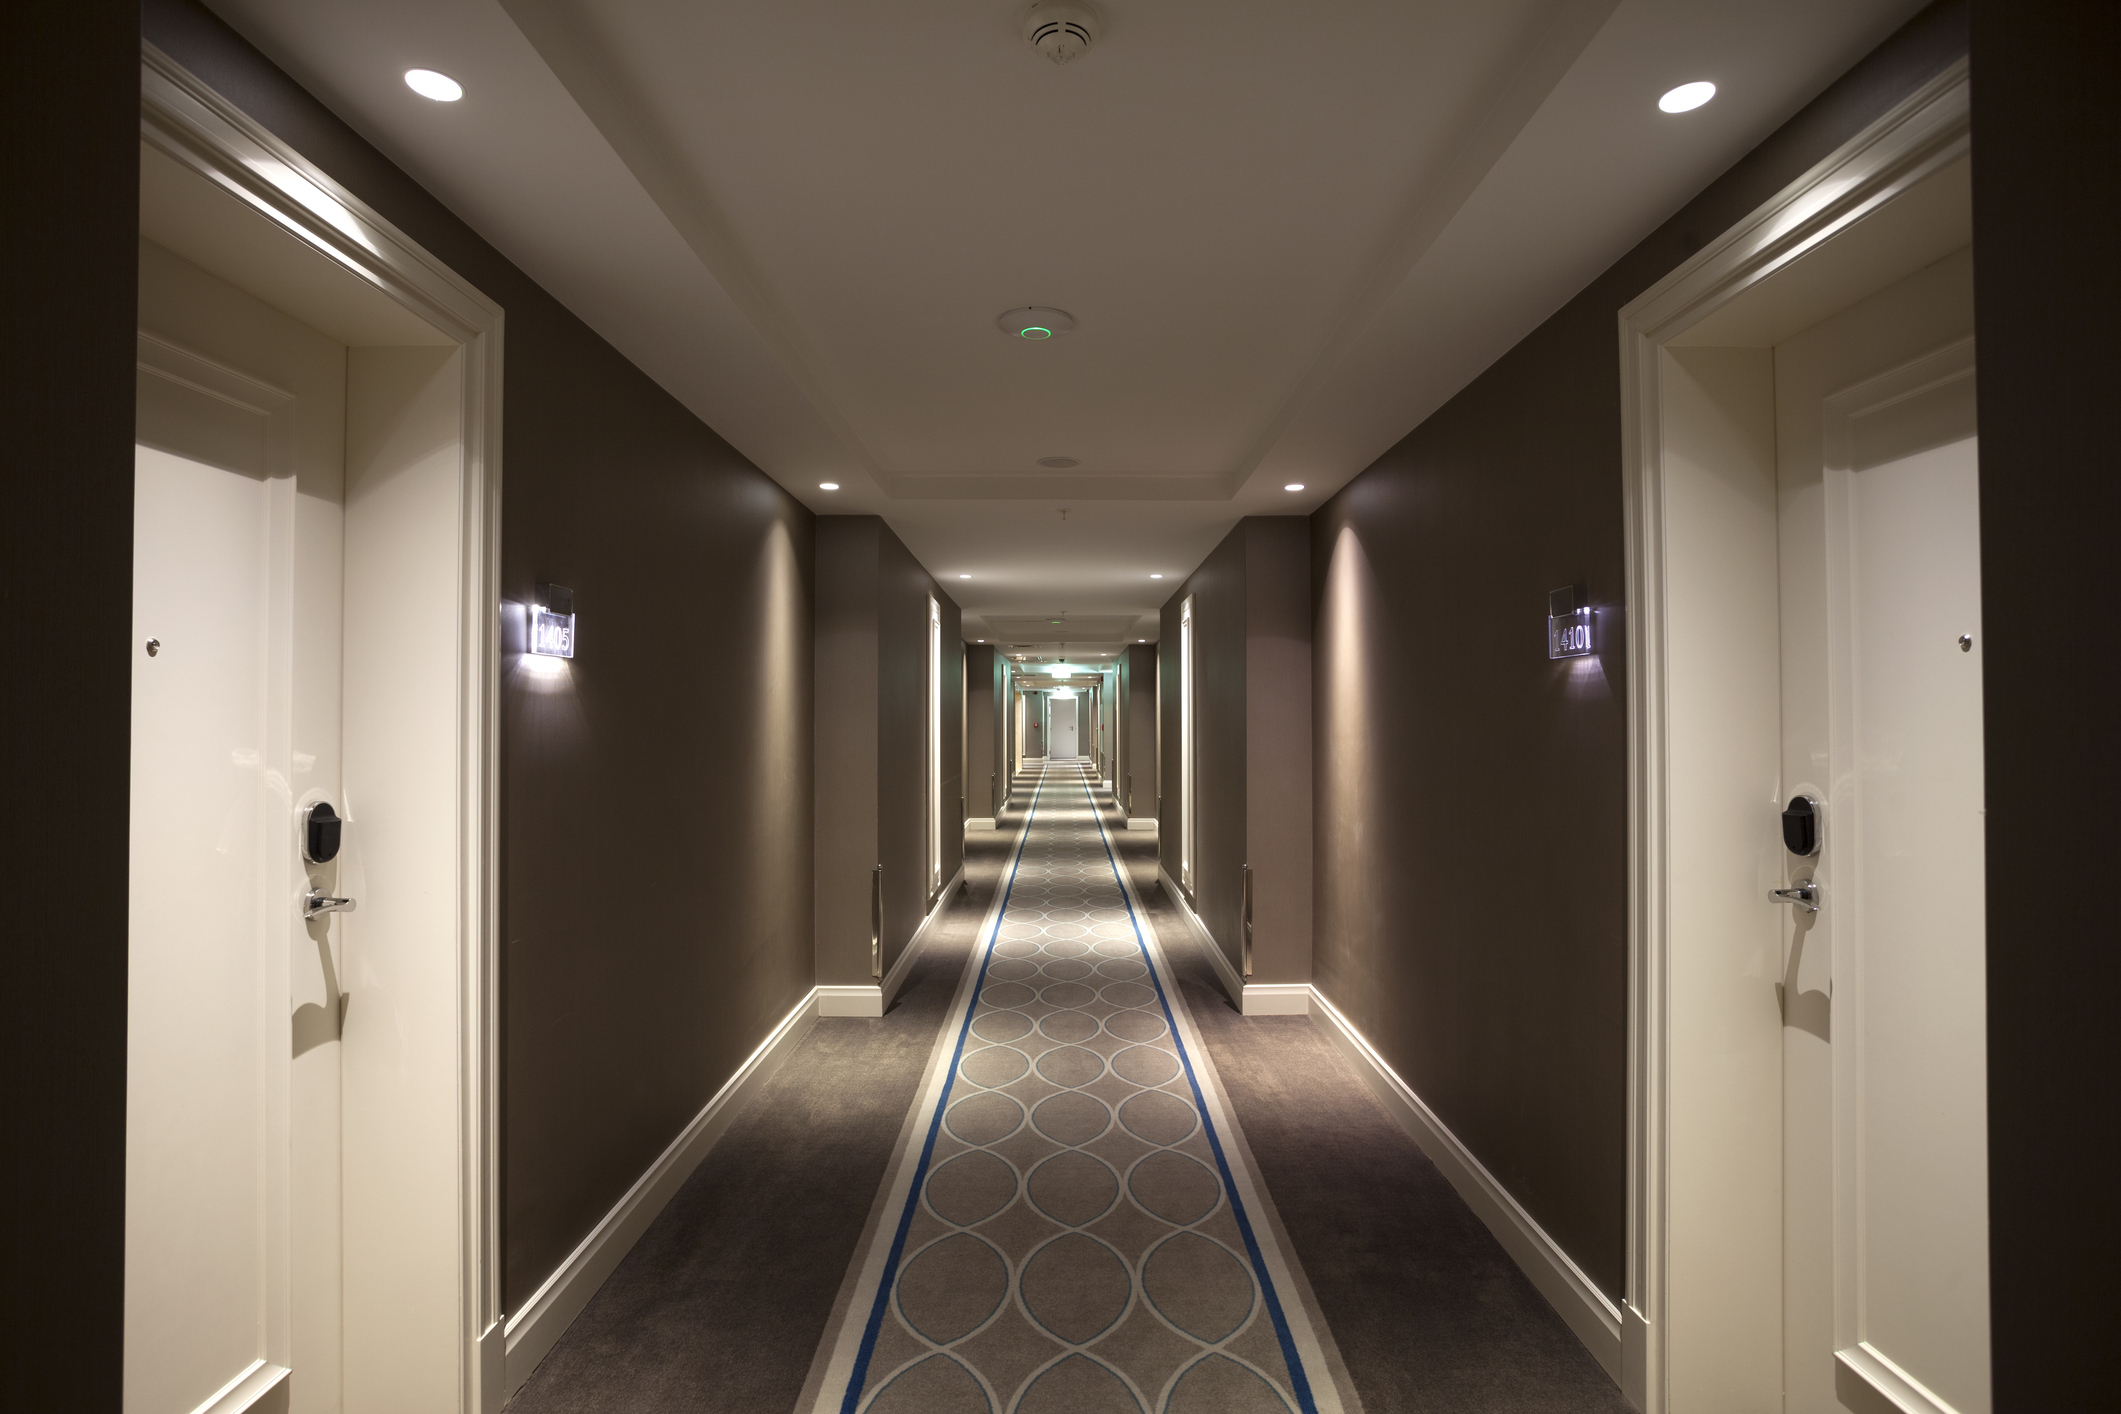 Hotel corridor with patterned carpet leading to intersecting hallway; doors on both sides